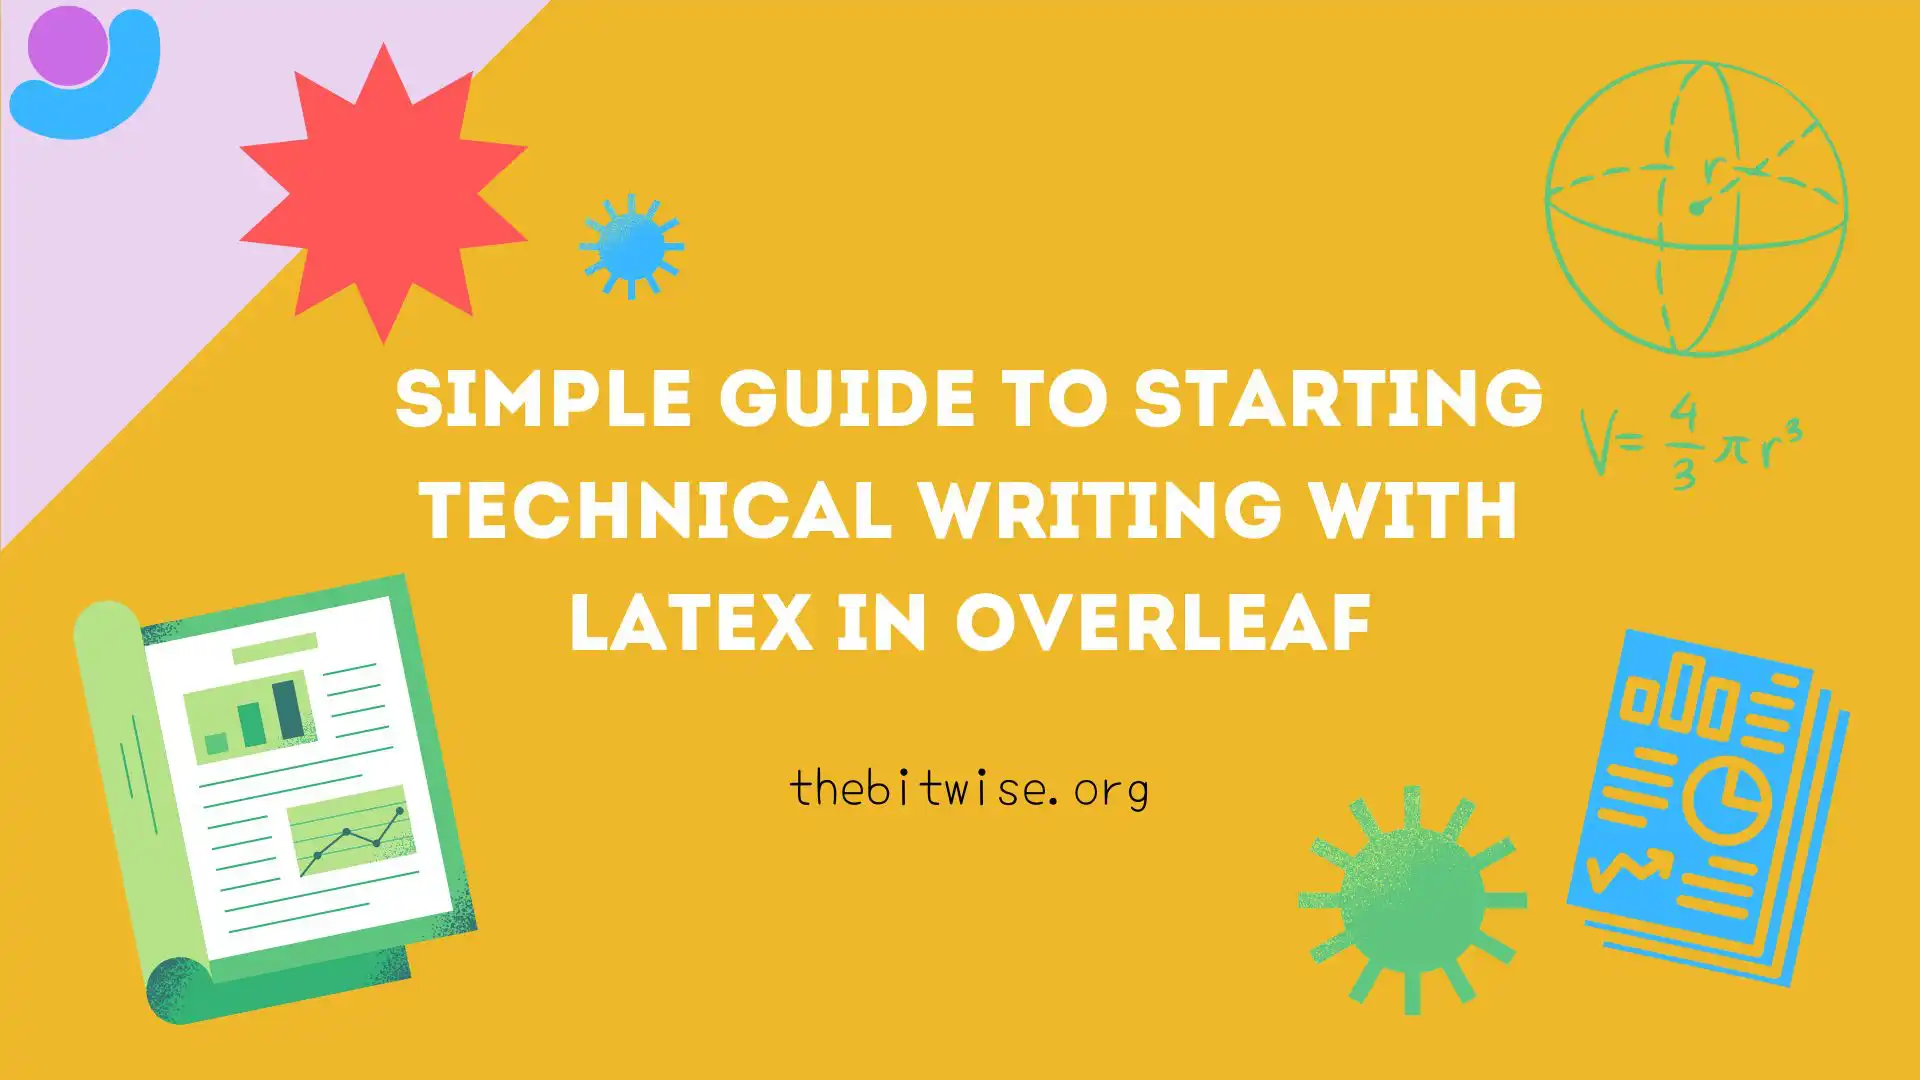 Simple Guide to Technical Writing with LaTeX in Overleaf